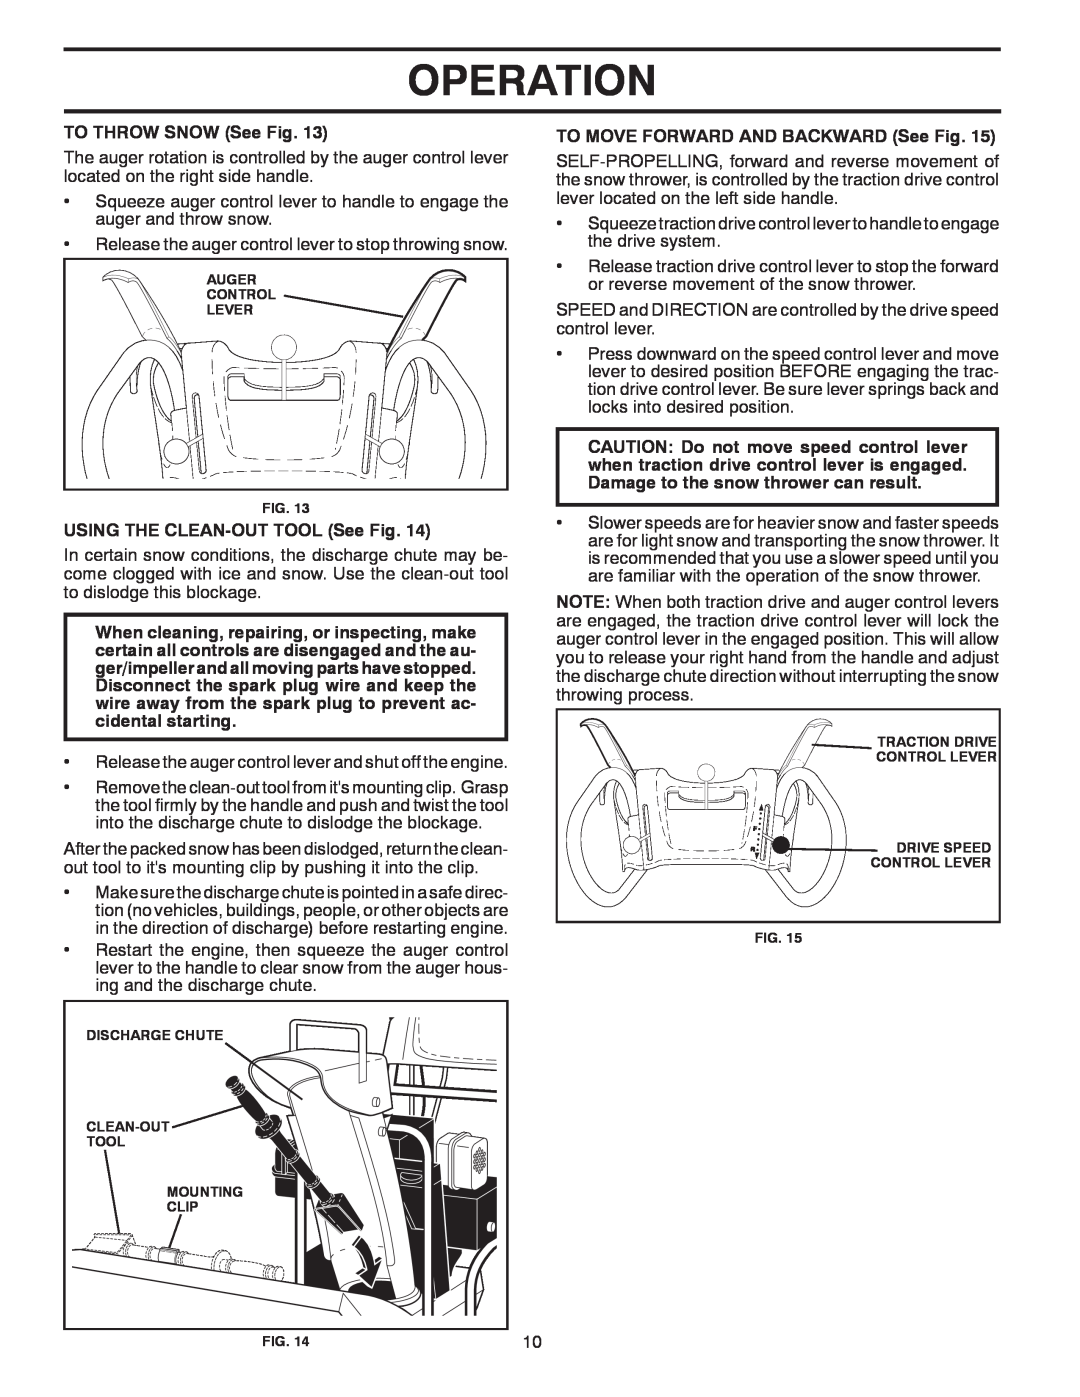 Poulan 96192003800, 435482, PR627ES owner manual Operation, TO THROW SNOW See Fig, USING THE CLEAN-OUT TOOL See Fig 